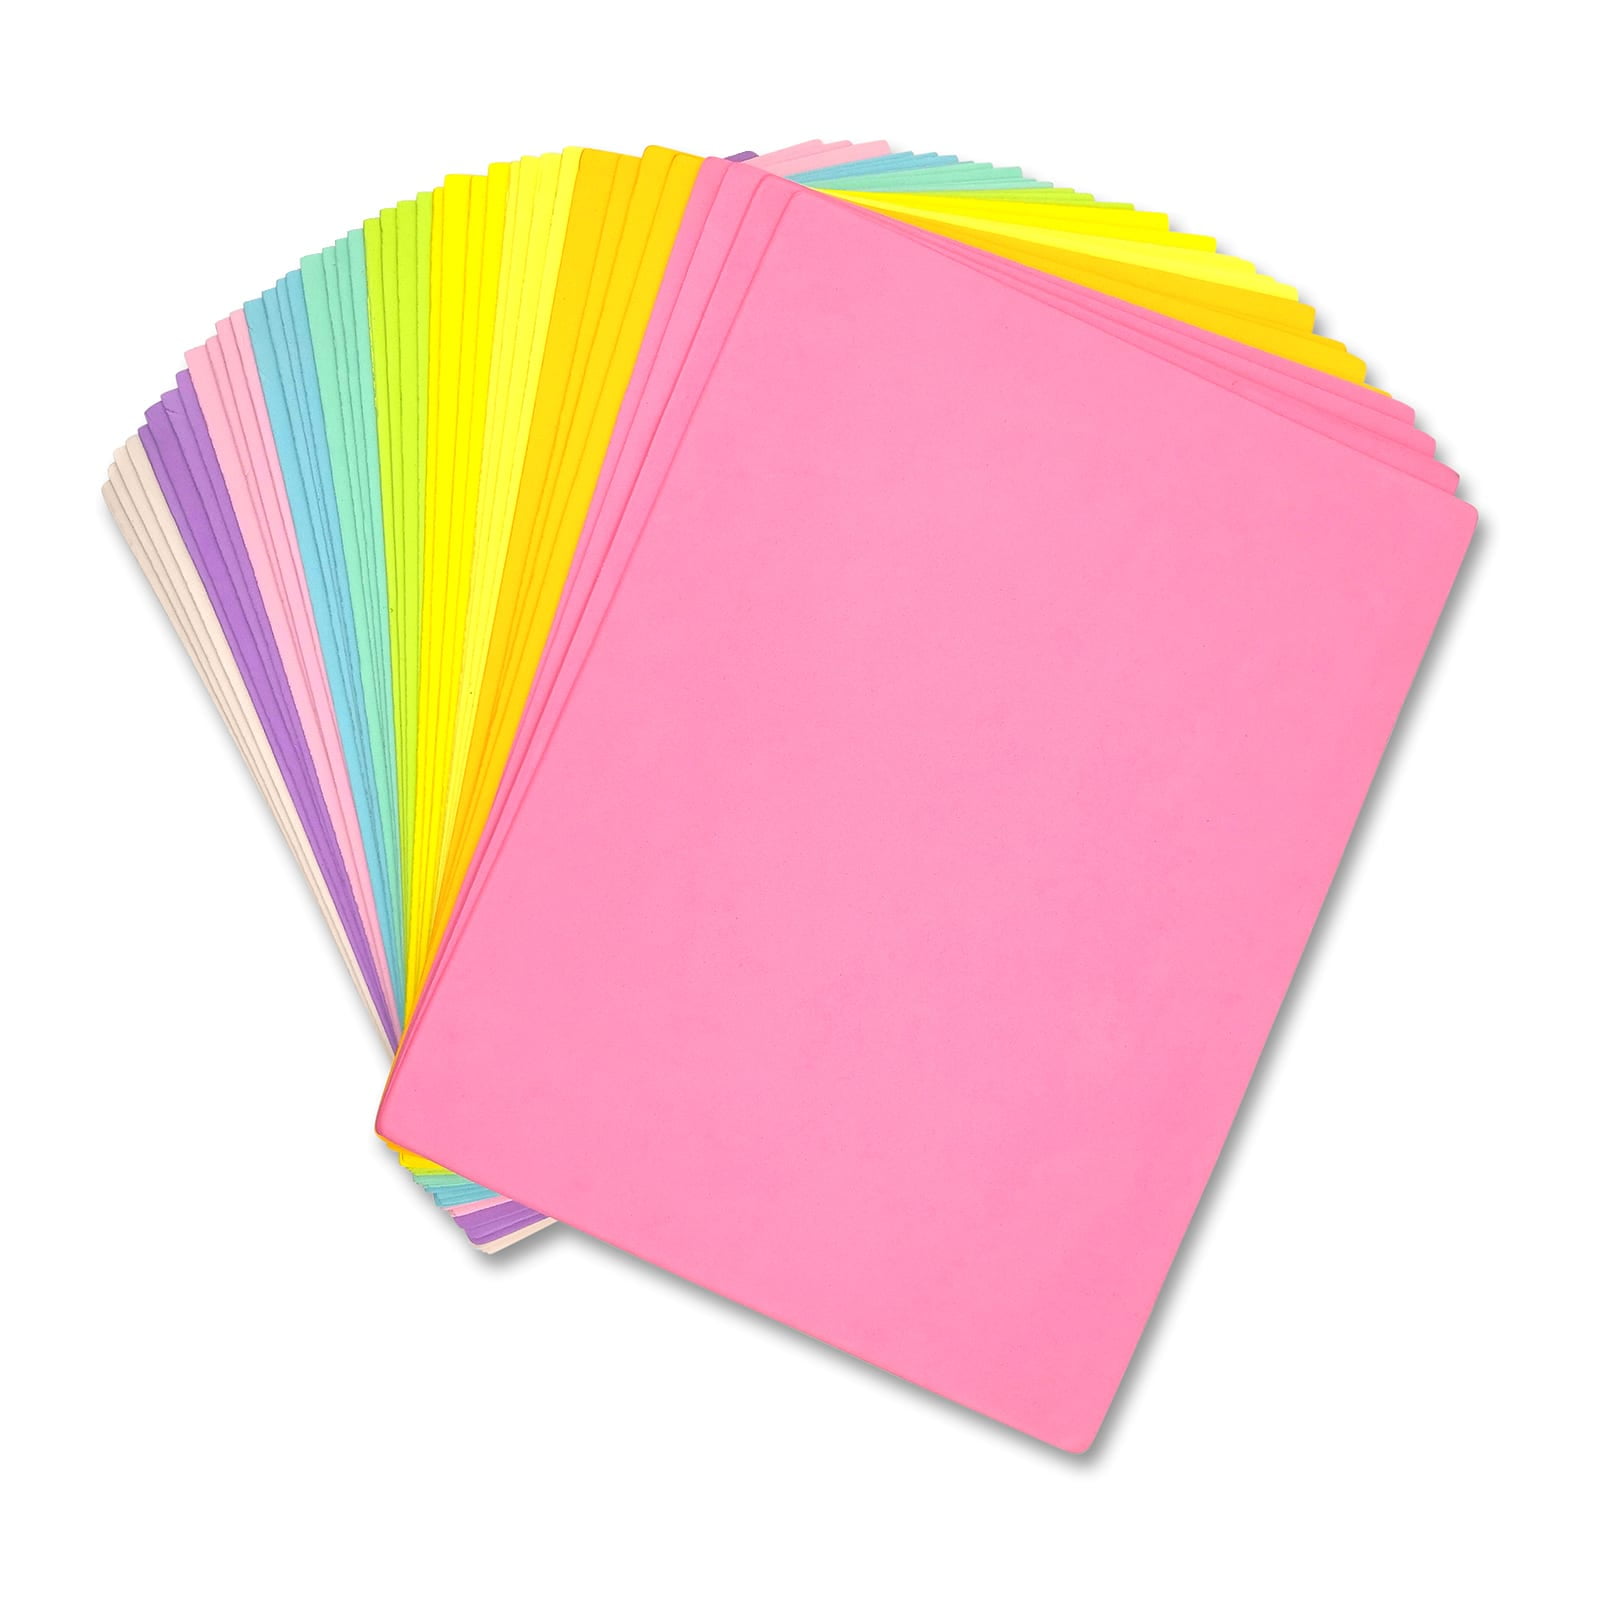 Foam Sheets in Assorted Colors, 6 x 9 inch, 40 Pack